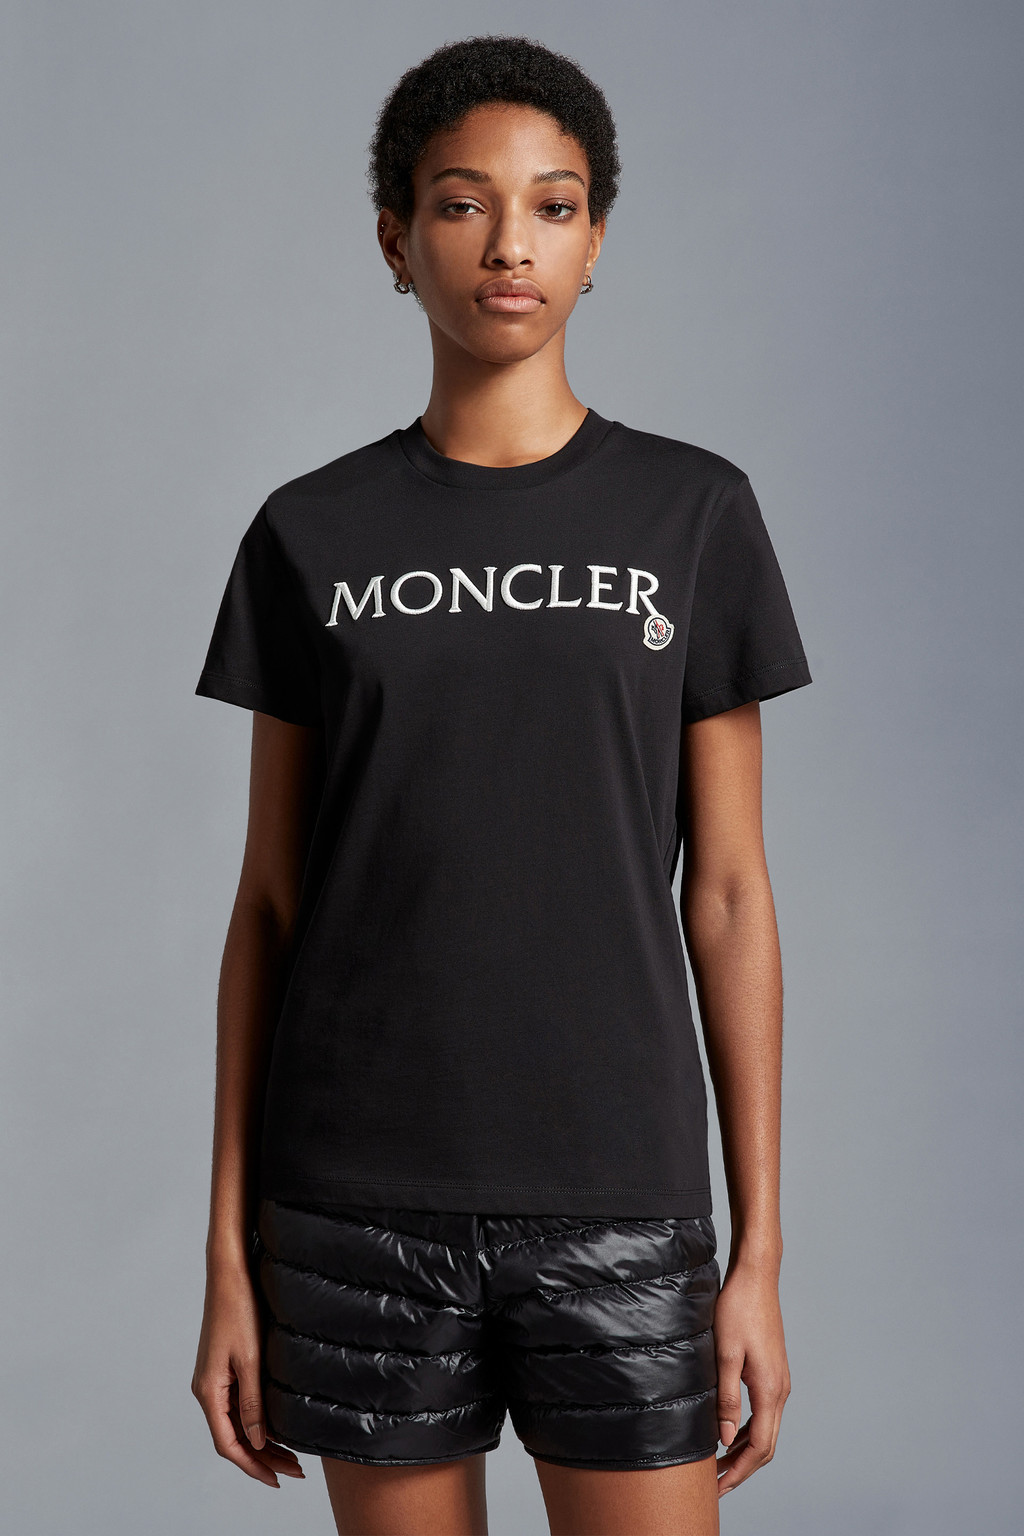 MONCLER モンクレール　Tシャツモンクレール